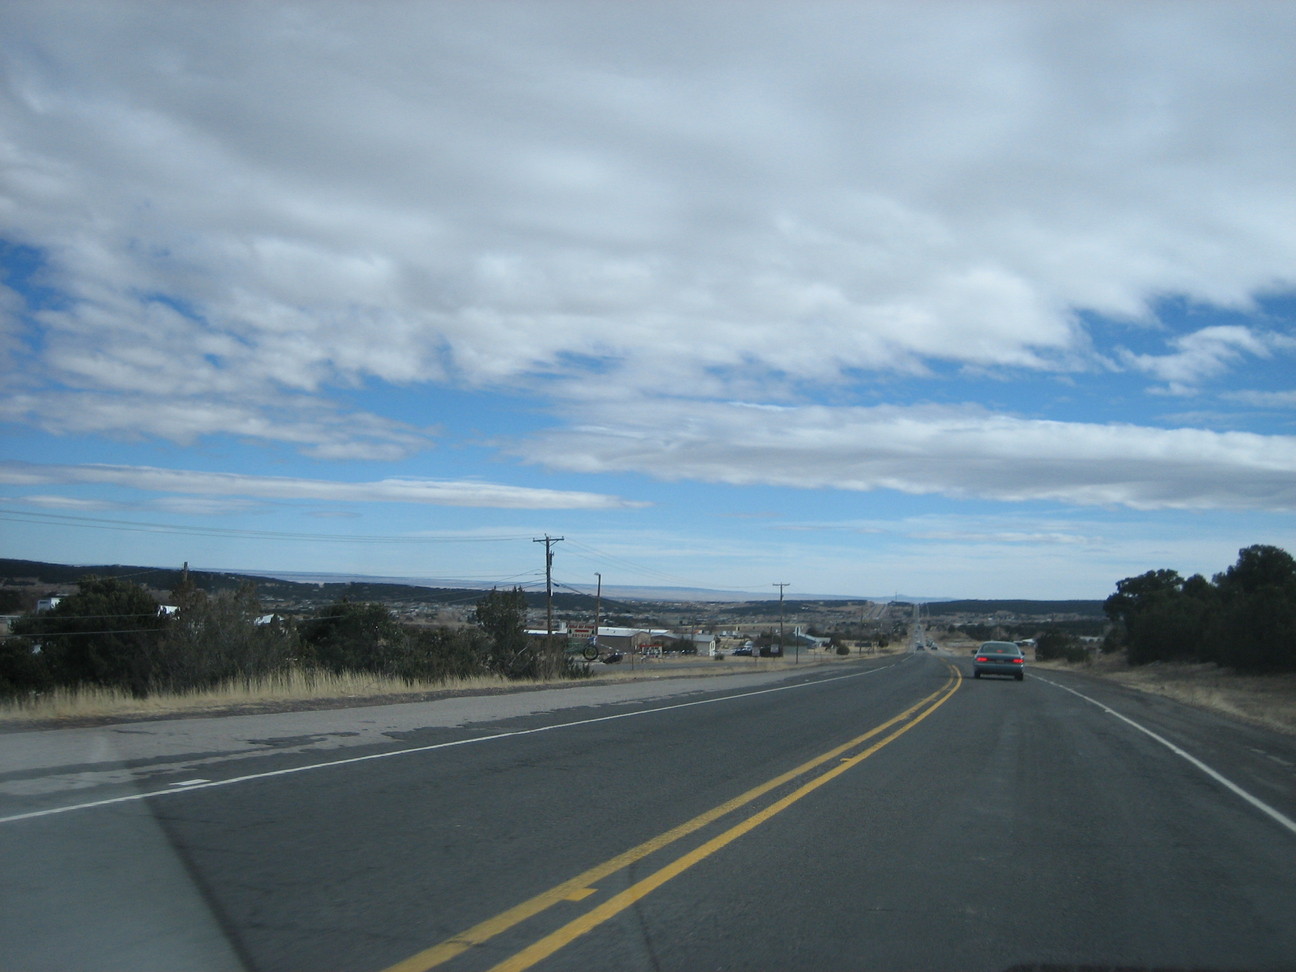 Edgewood, NM: Travelling east on Route 66 entering Edgewood in January '06